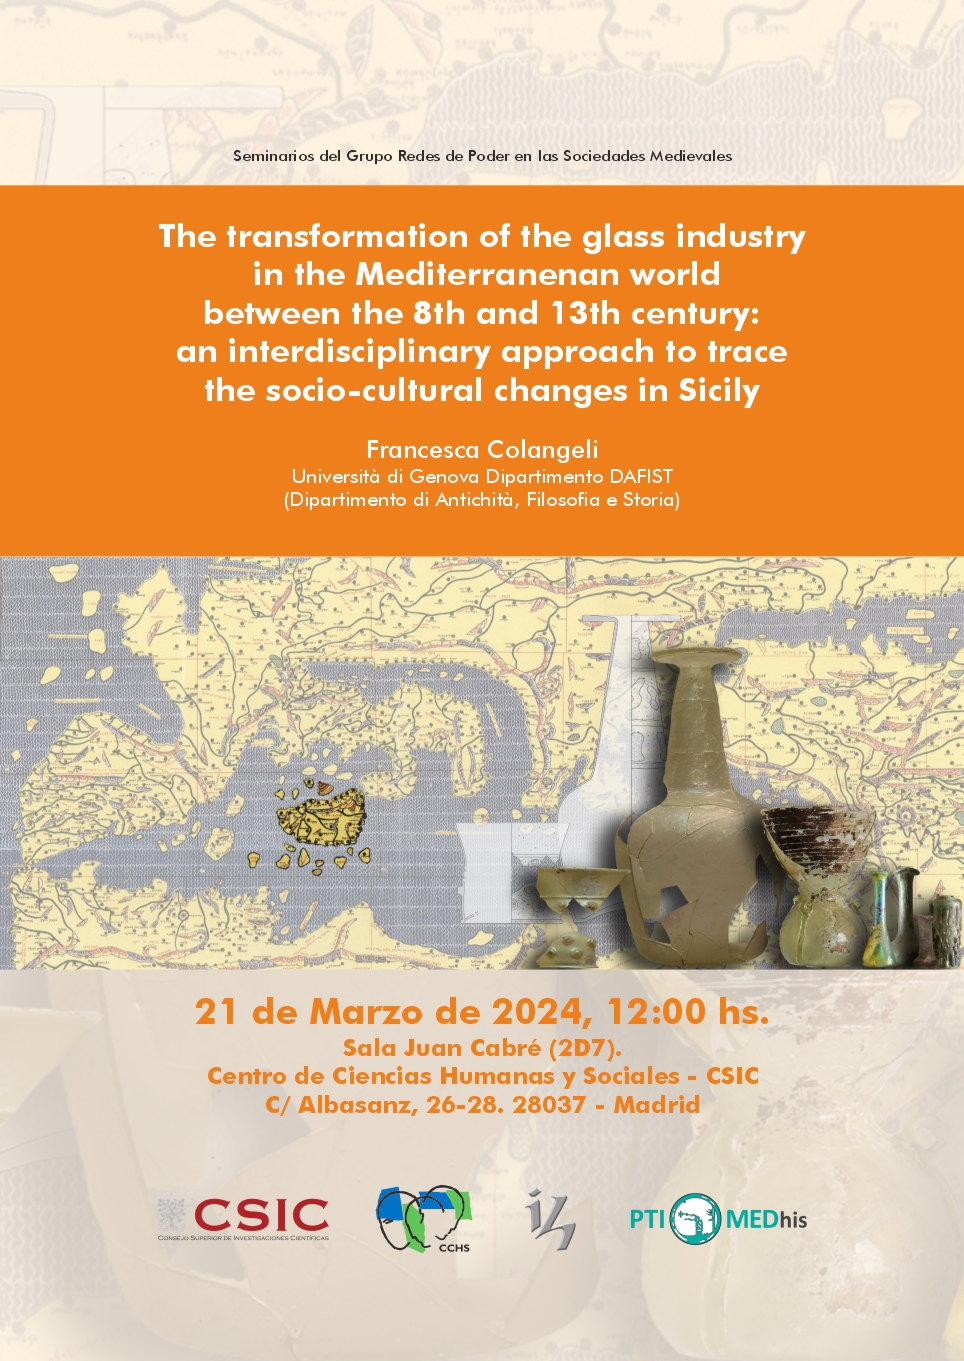 Seminarios del Grupo Redes de Poder en las Sociedades Medievales: "The transformation of the glass industry  in the Mediterranenan world  between the 8th and 13th century:  an interdisciplinary approach to trace  the socio-cultural changes in Sicily"